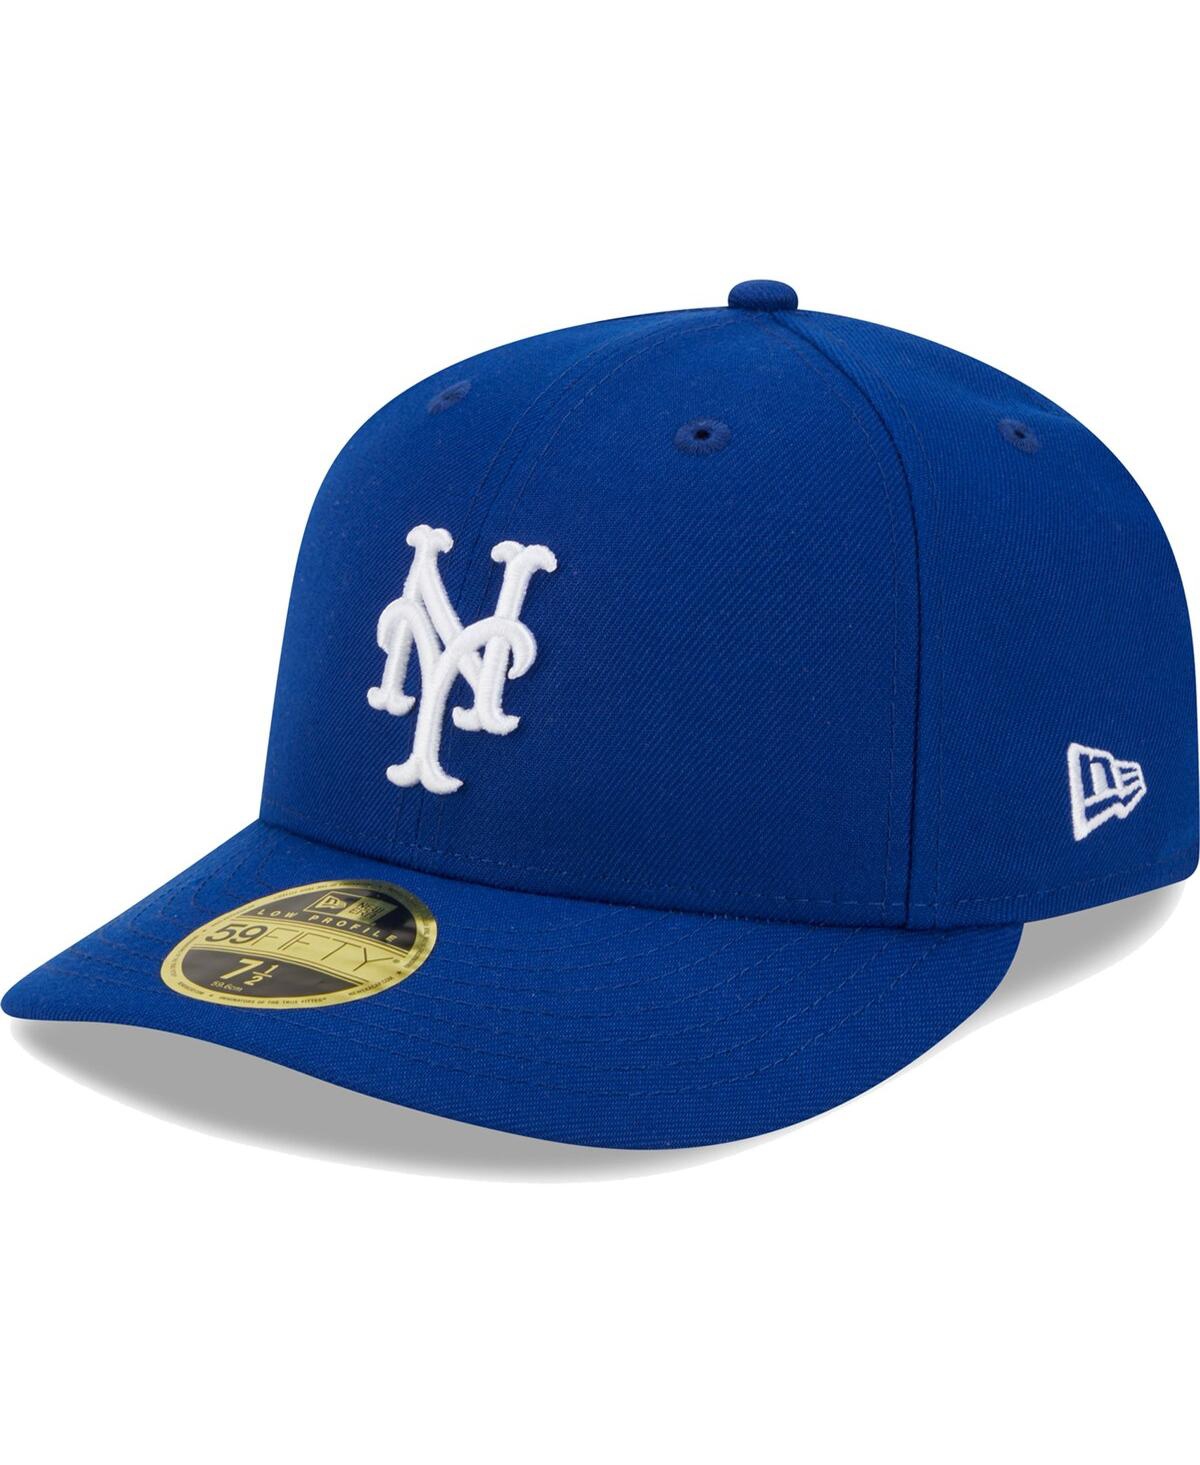 Men's New Era Royal New York Mets White LogoÂ Low Profile 59FIFTY Fitted Hat - Royal